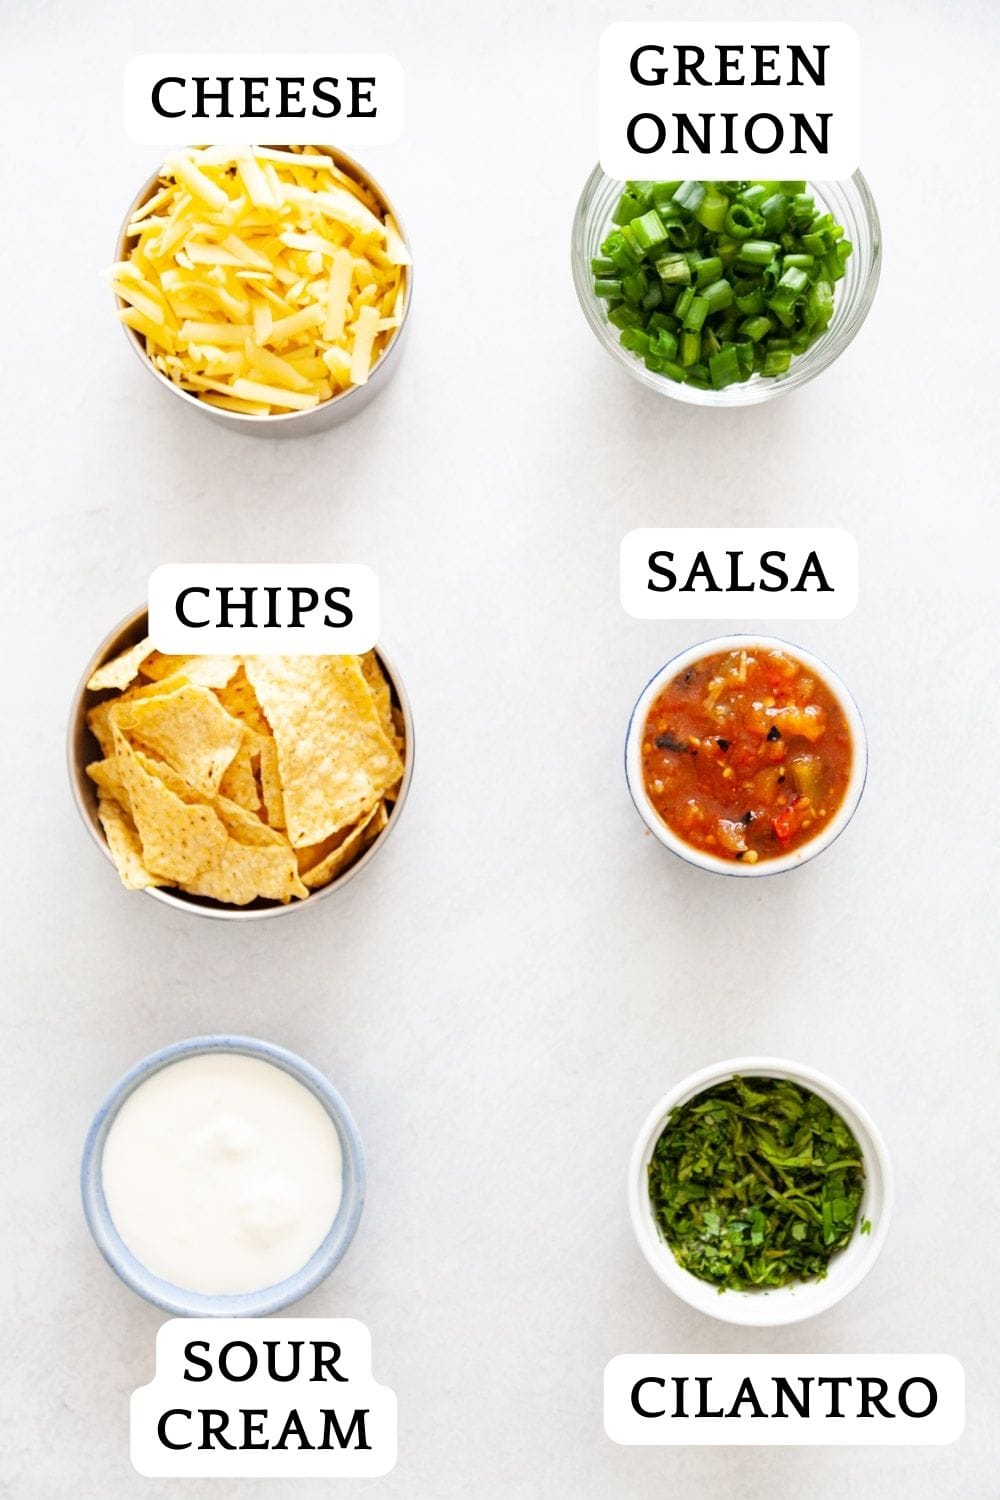 Labeled toppings for this recipe, including grated cheese, green onion, chips, sour cream, salsa and cilantro.